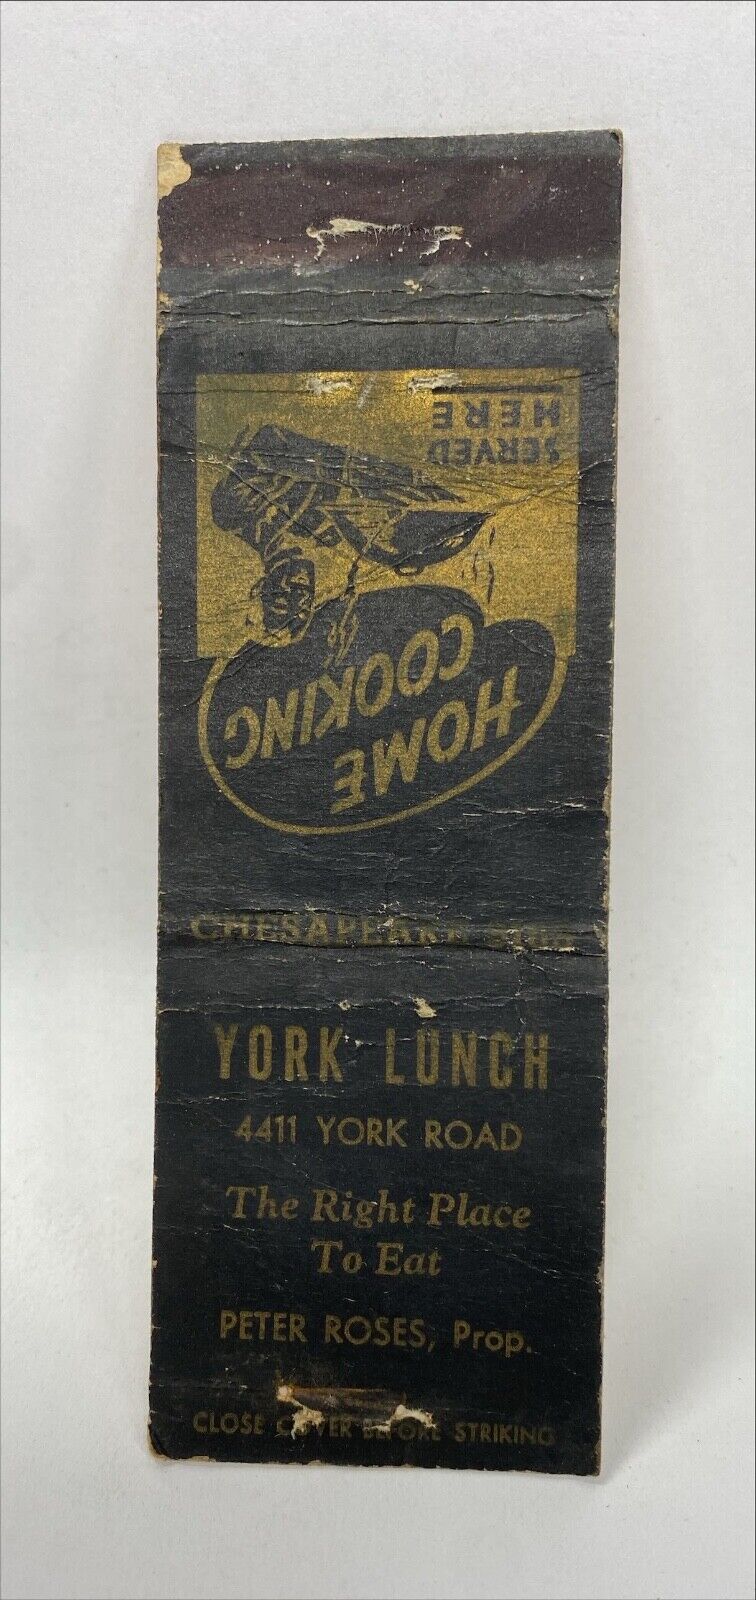 Baltimore, MD York Lunch Peter Roses, Prop. Vintage Matchbook Cover